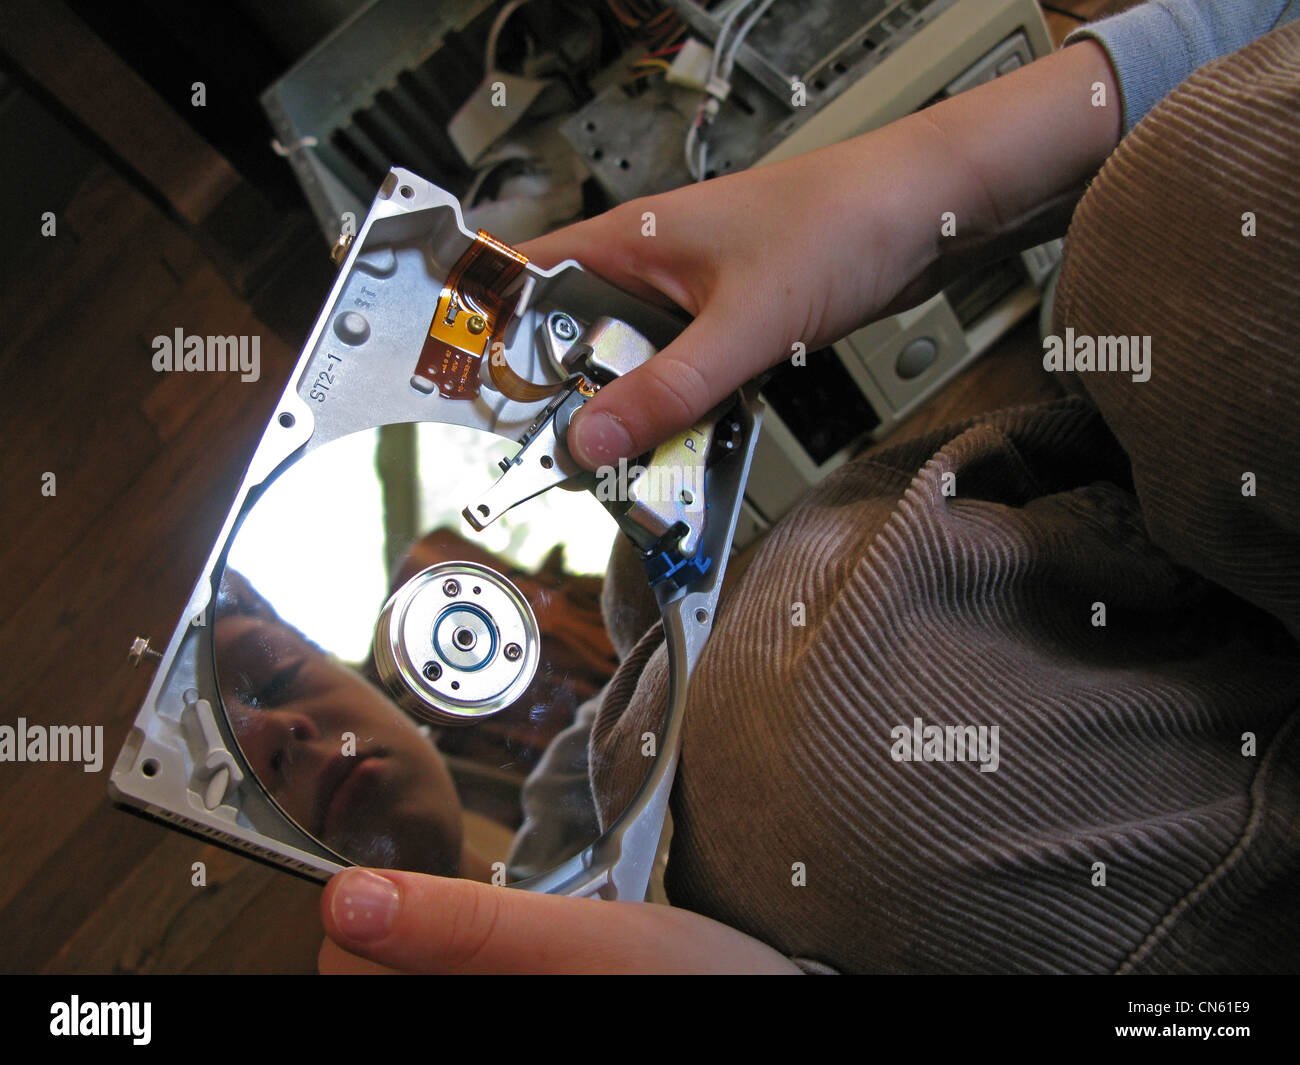 Boy looking at an opened hard drive from a computer Stock Photo